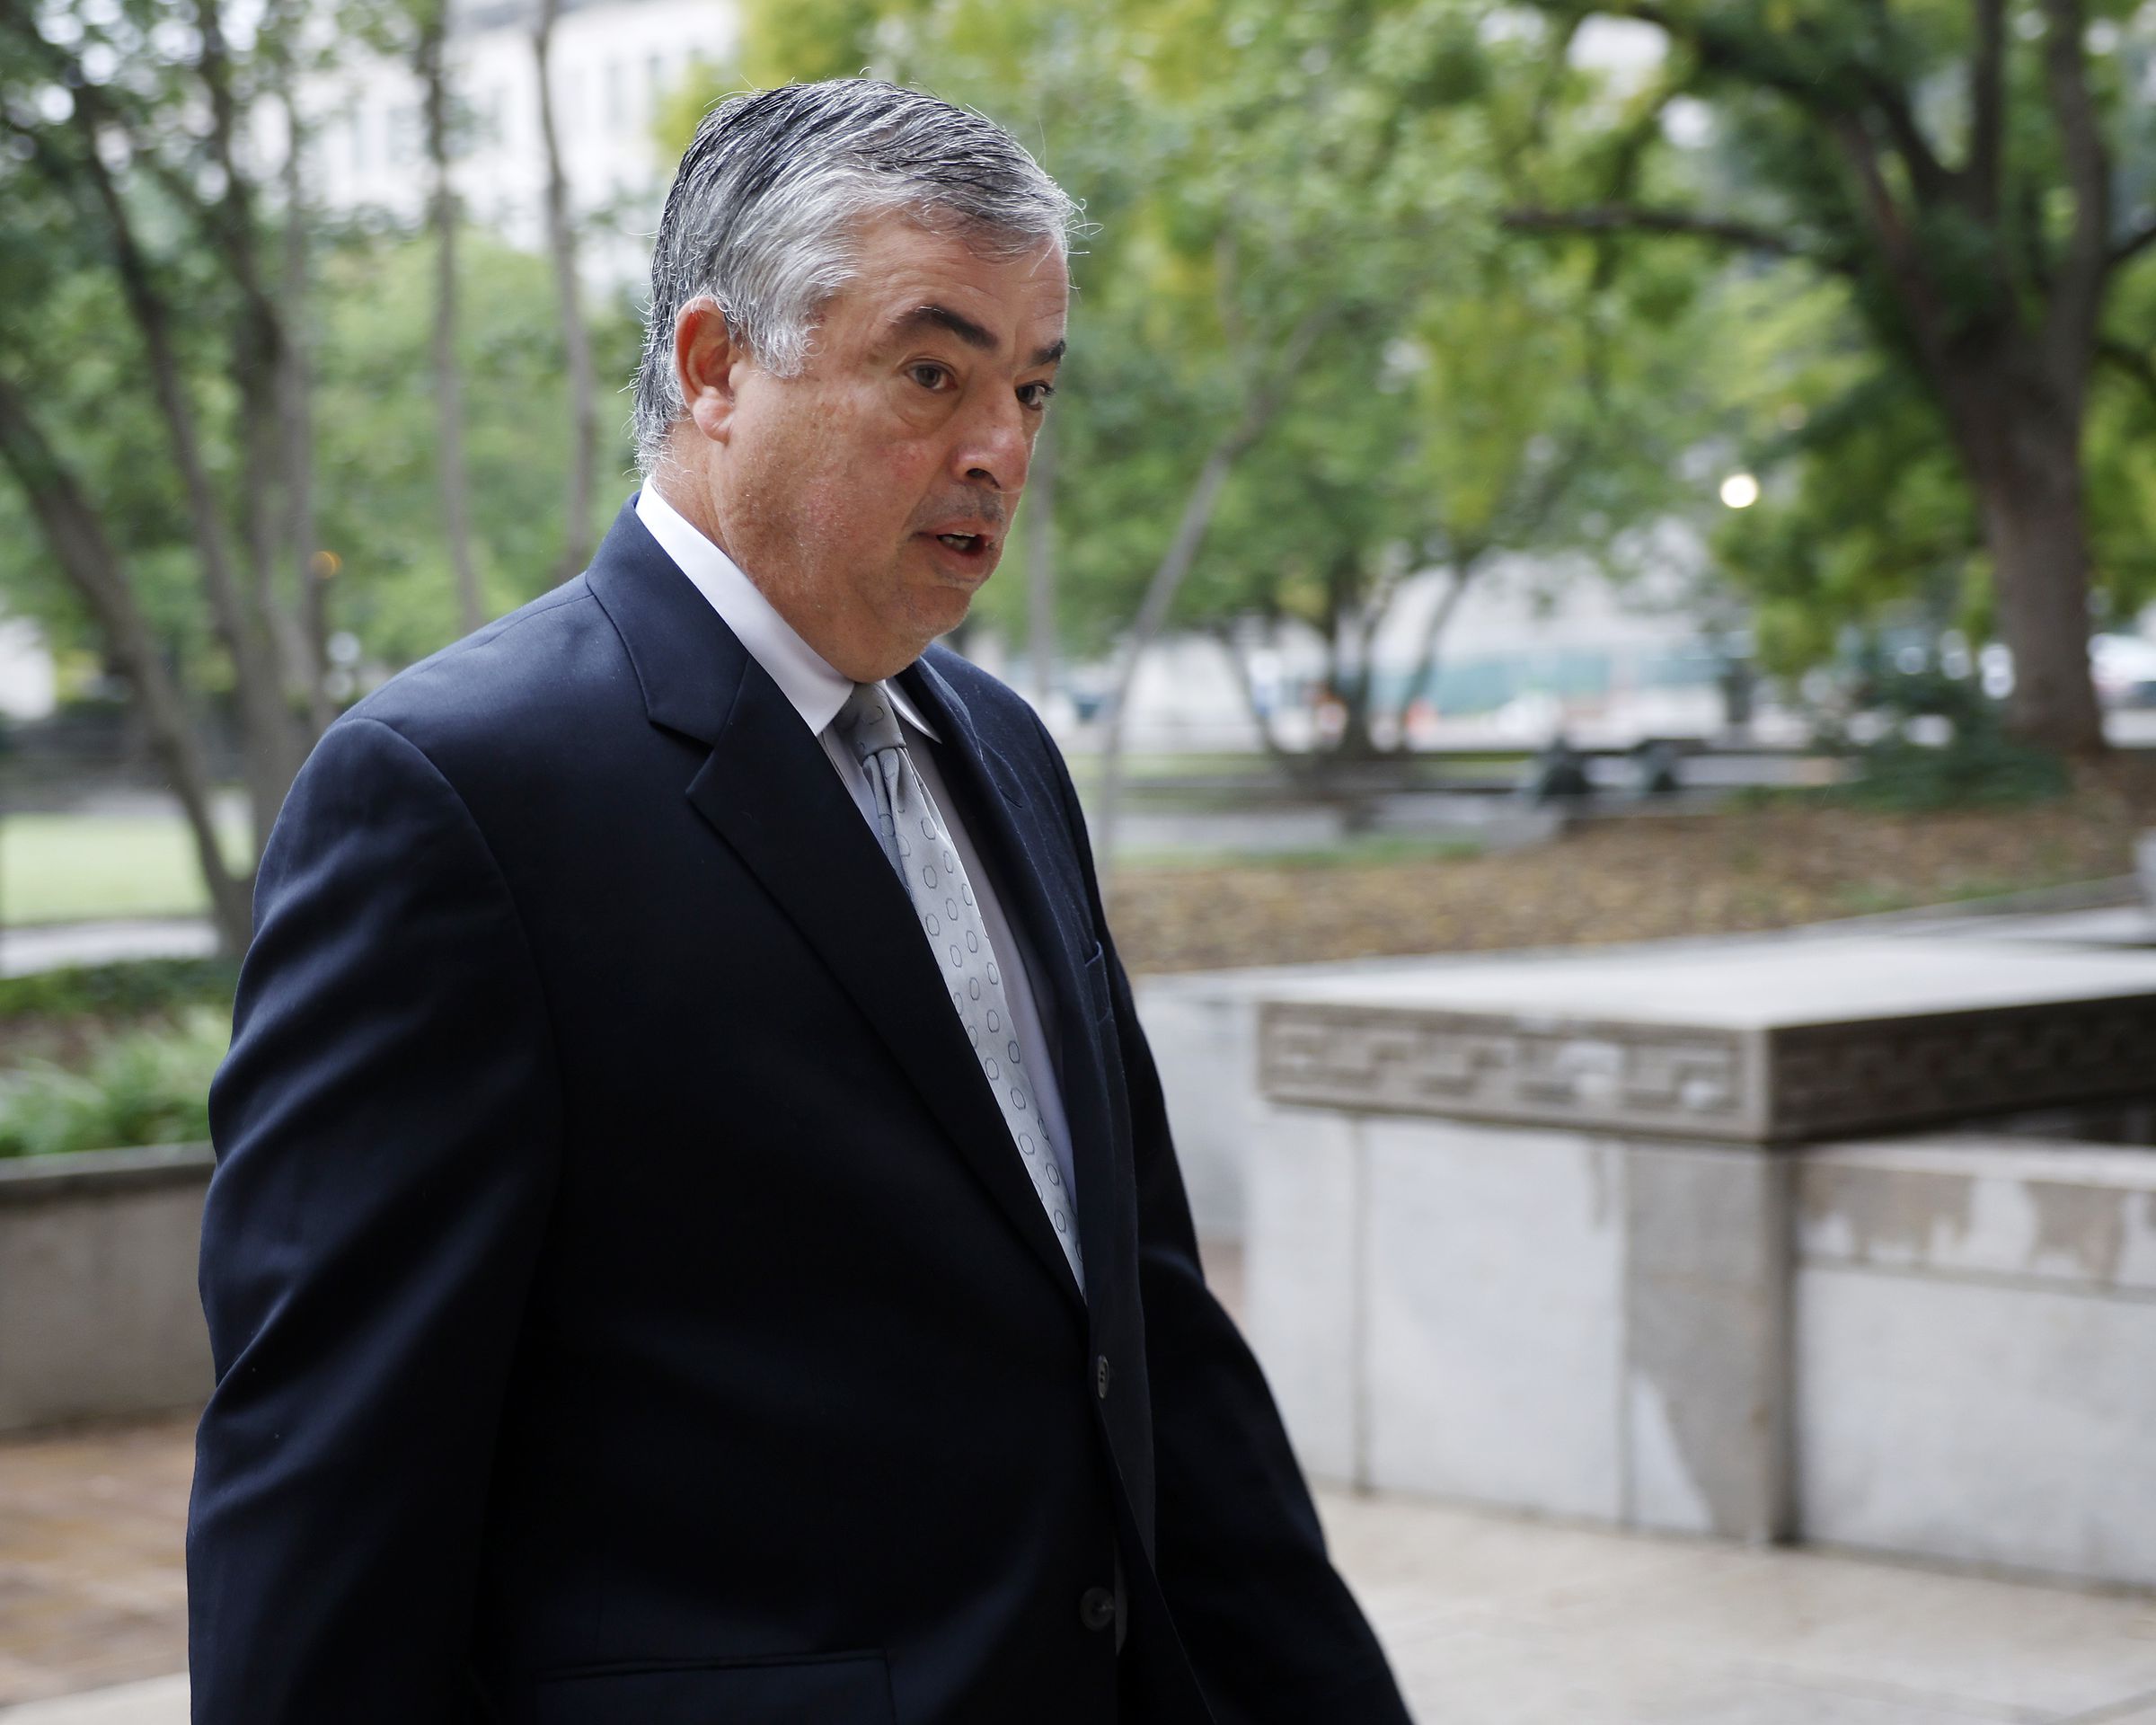 Apple Executive Eddy Cue To Testify In Government’s Case Against Google In D.C.